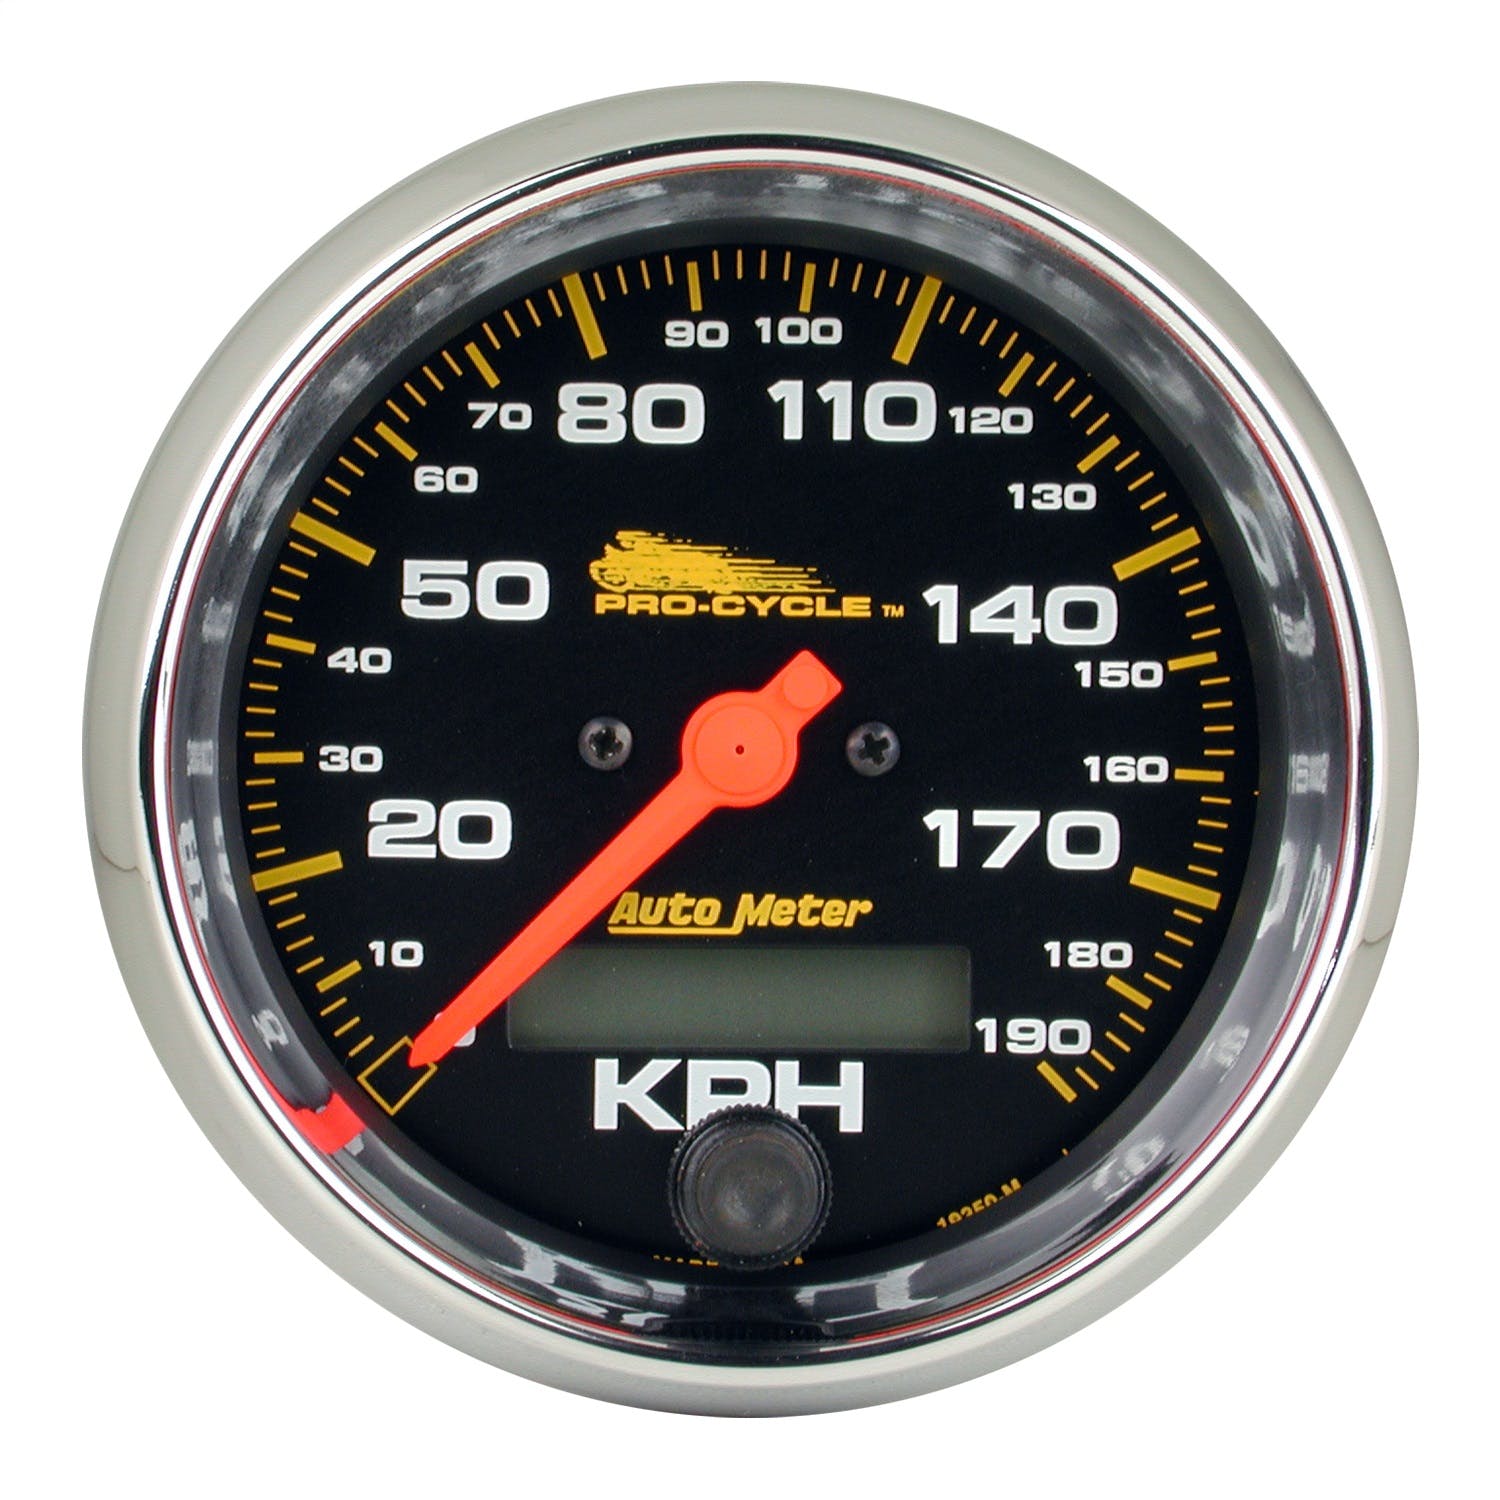 AutoMeter Products 19350 Speedometer Gauge, Electric Black-Pro Cycle 3 3/4, 120 MPH